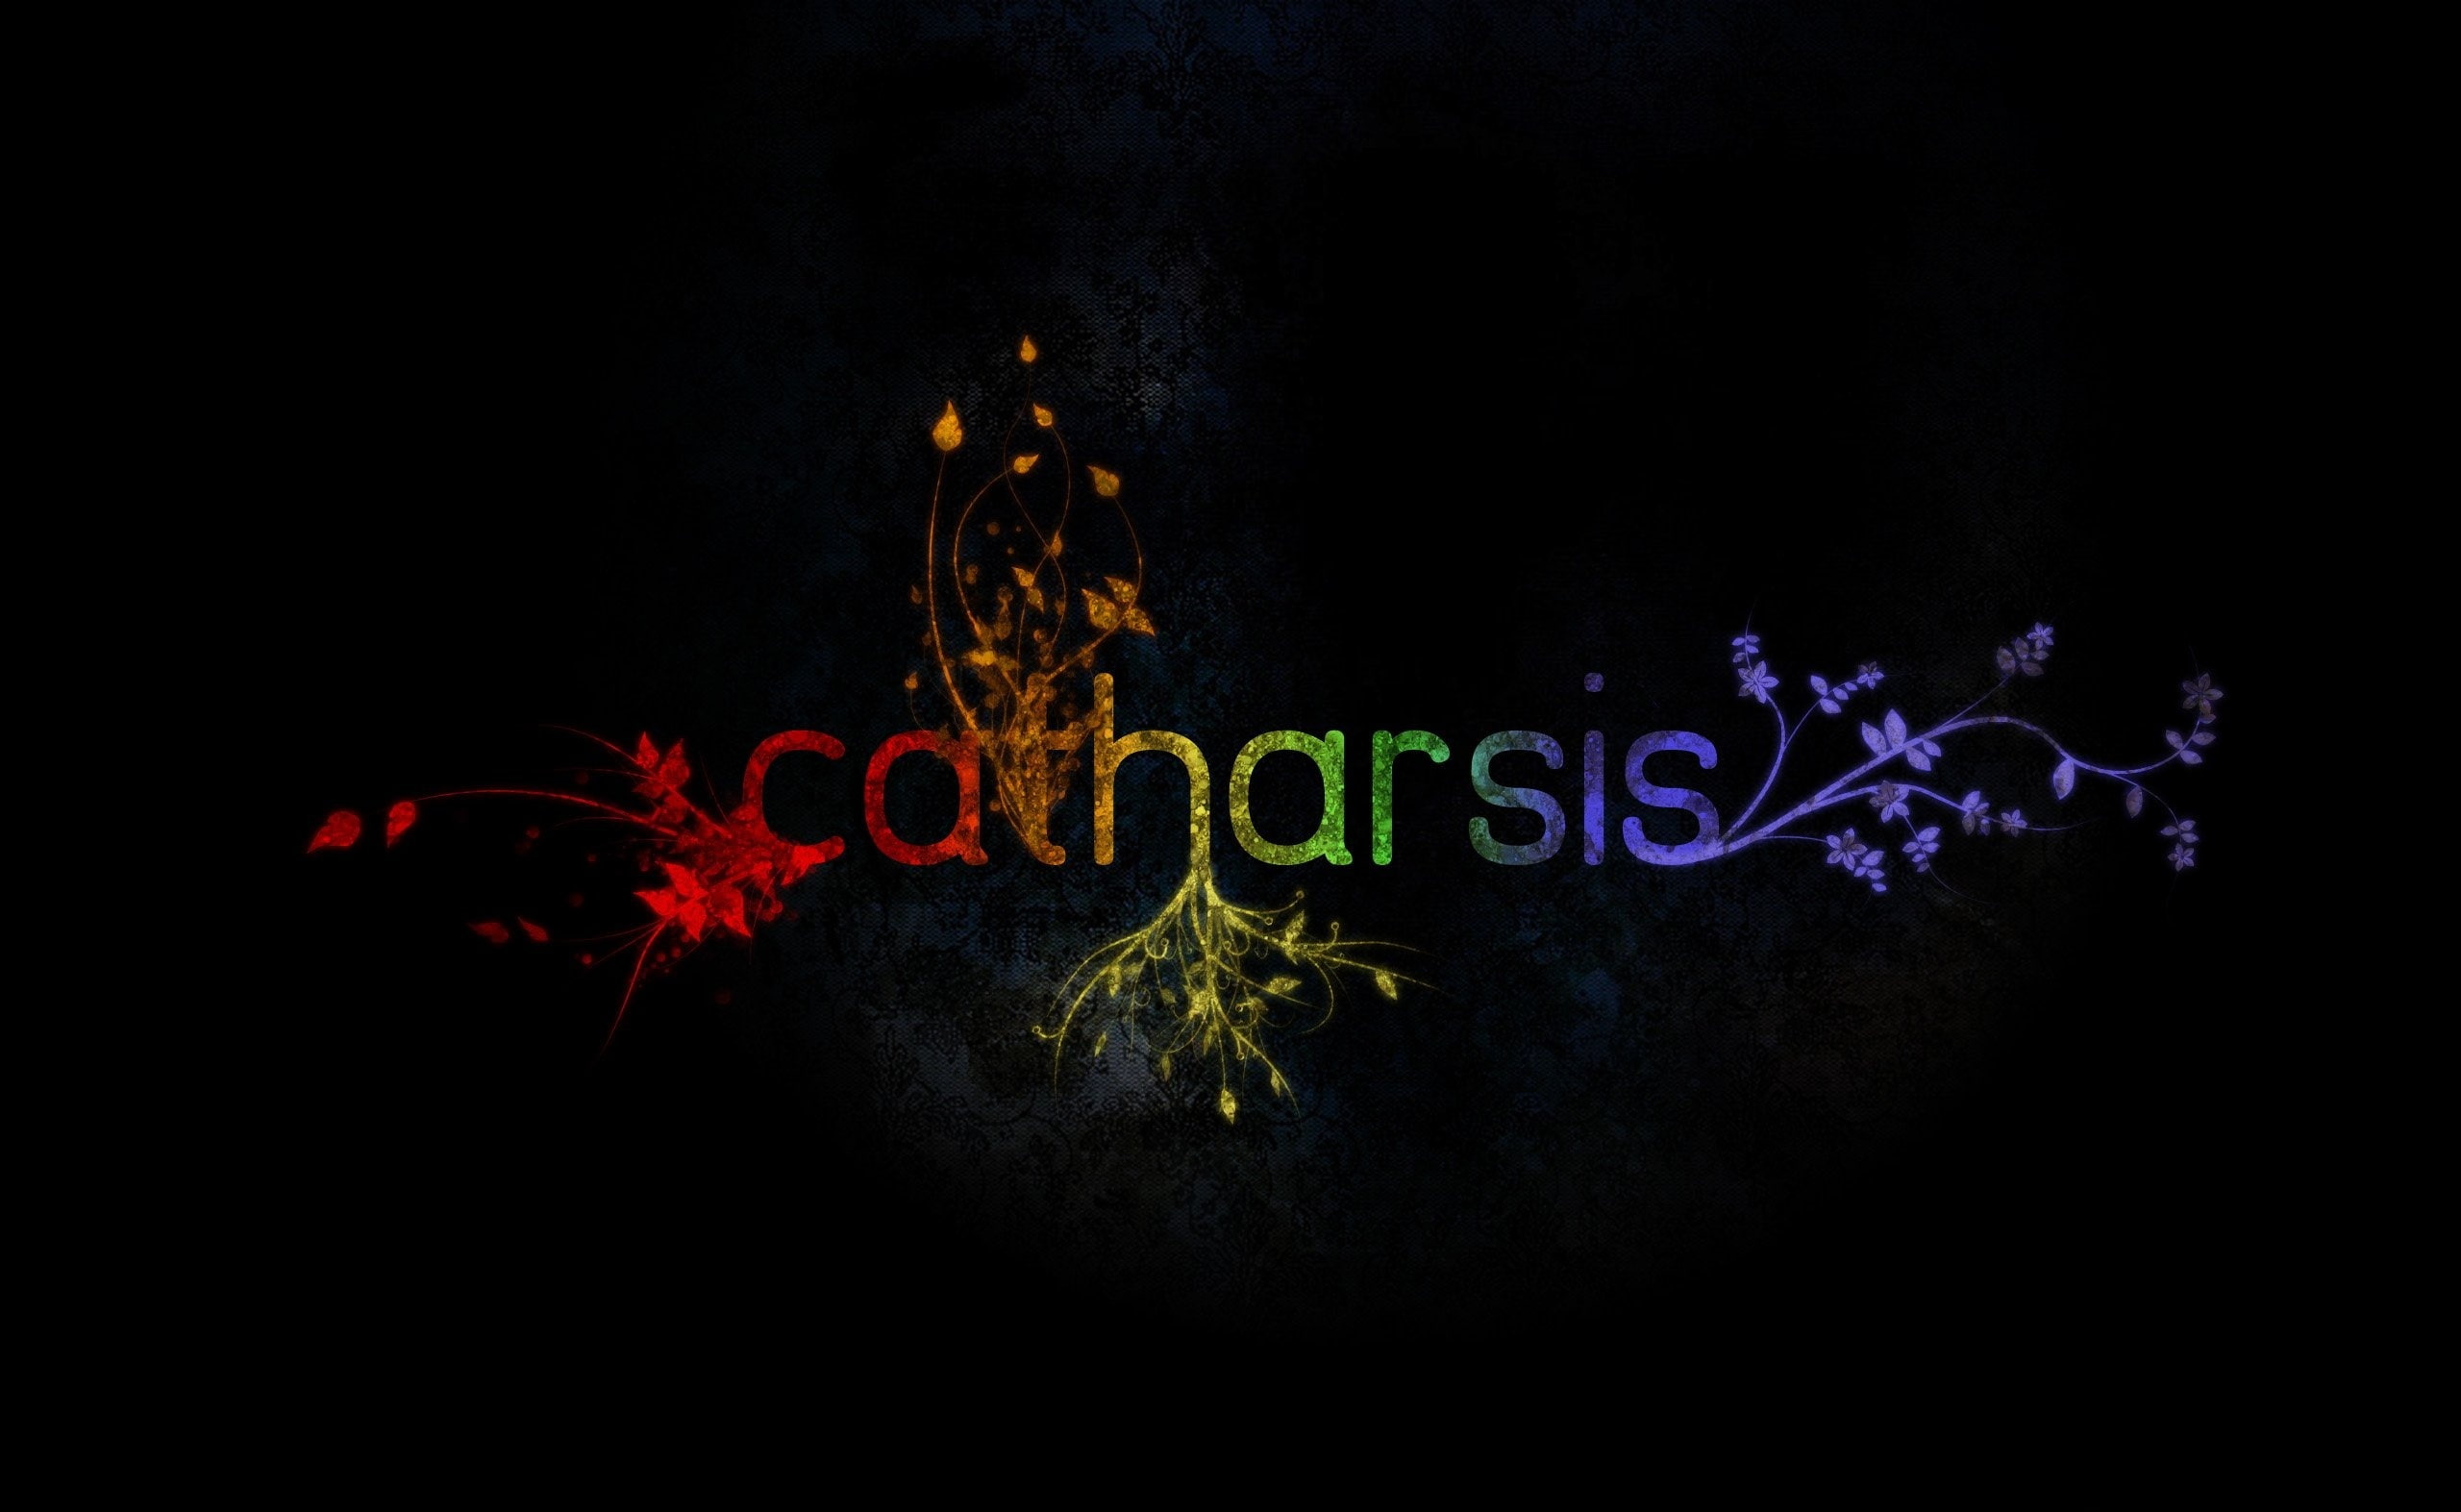 Catharsis, Catharsis logo, Artistic, Typography, black background